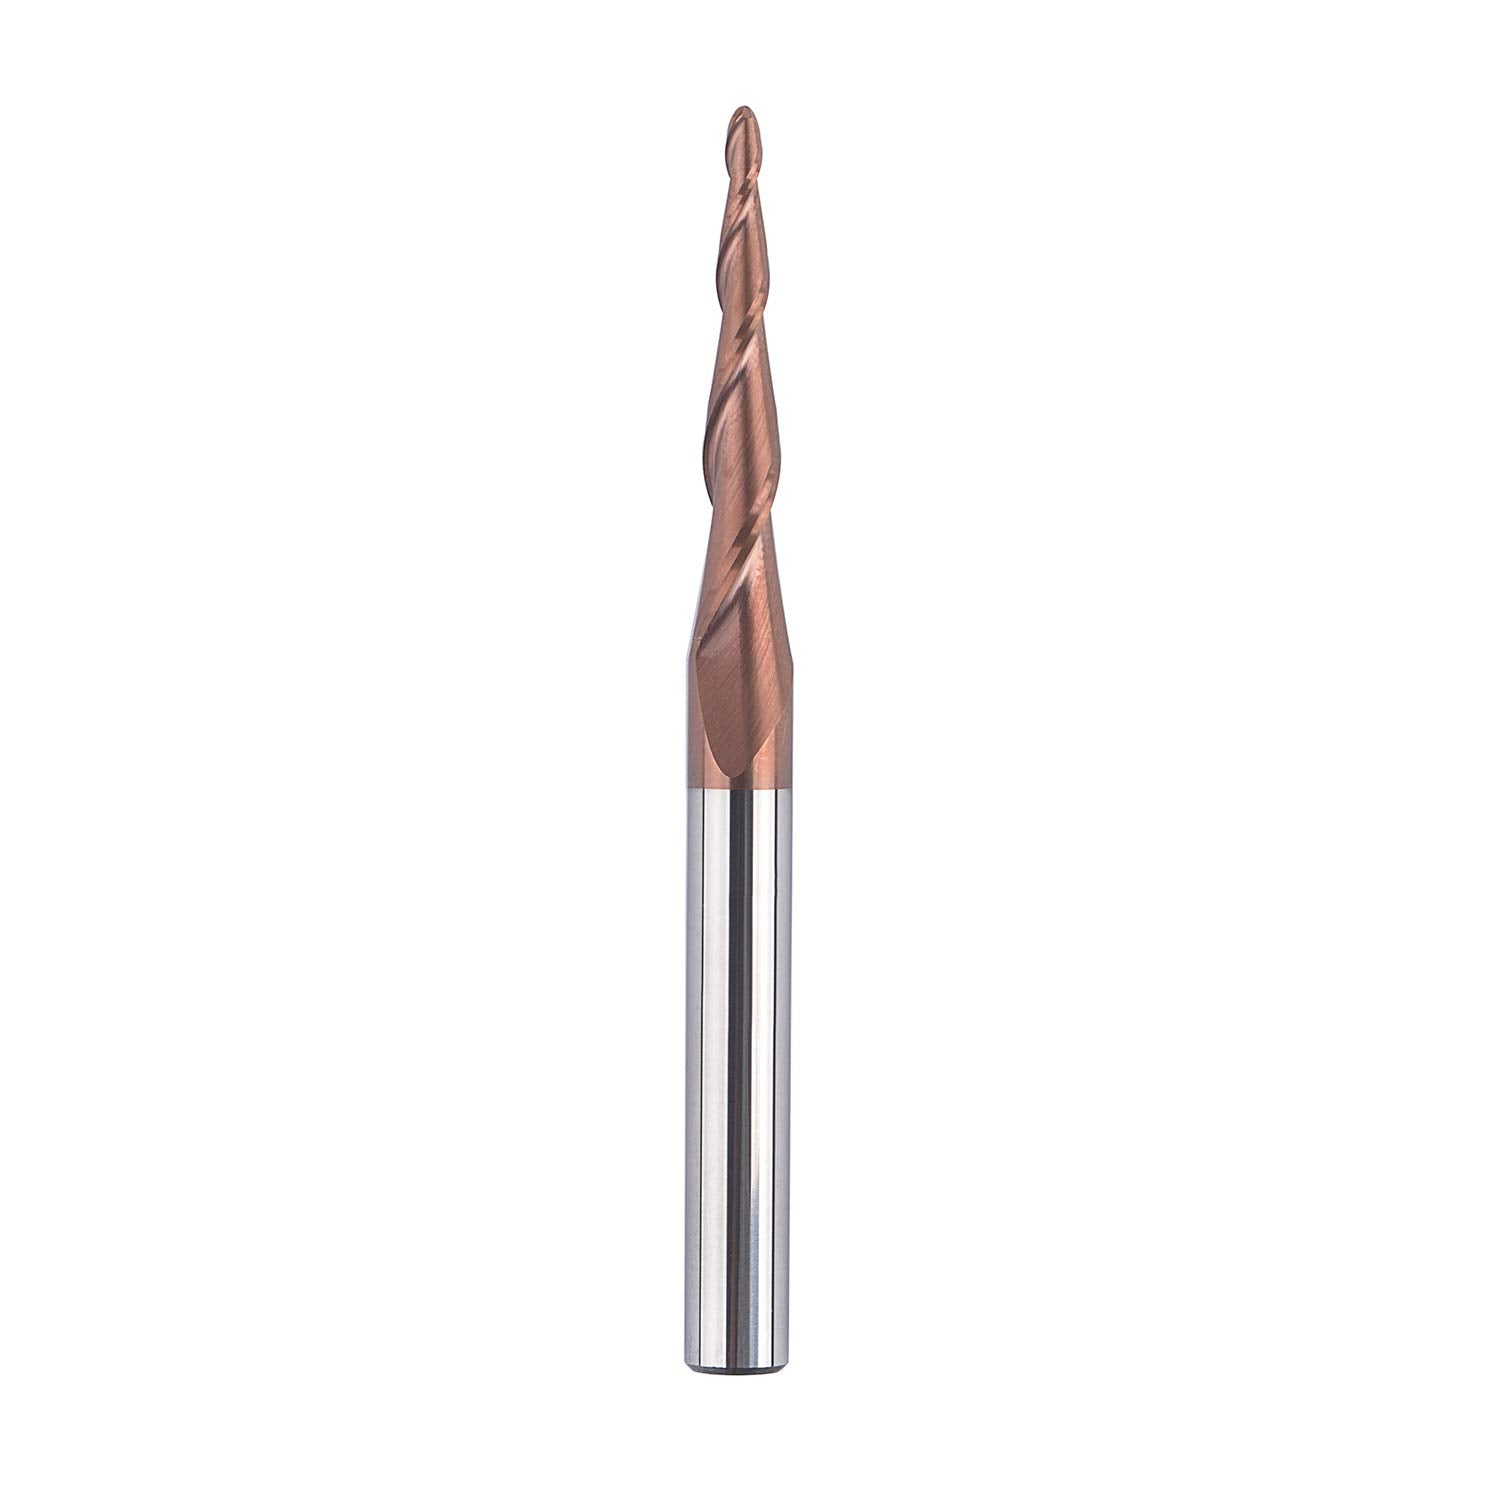 SpeTool 2D/3D Tapered Ball Nose 1.0mm Radius End Mill H-Si Coated